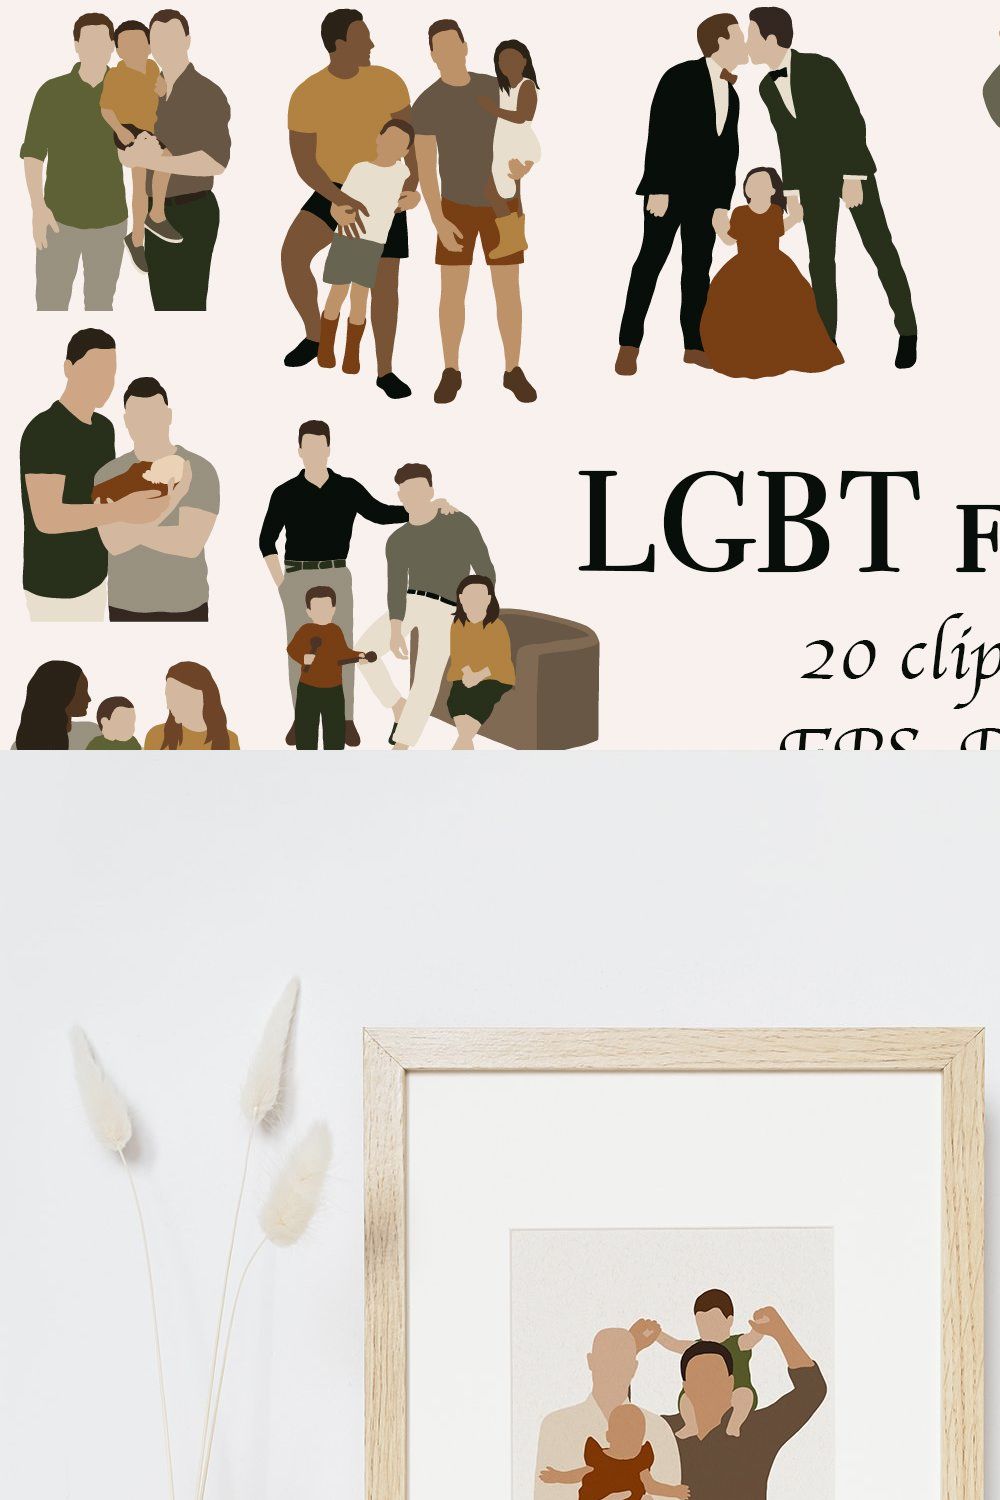 Abstract LGBT family clipart pinterest preview image.